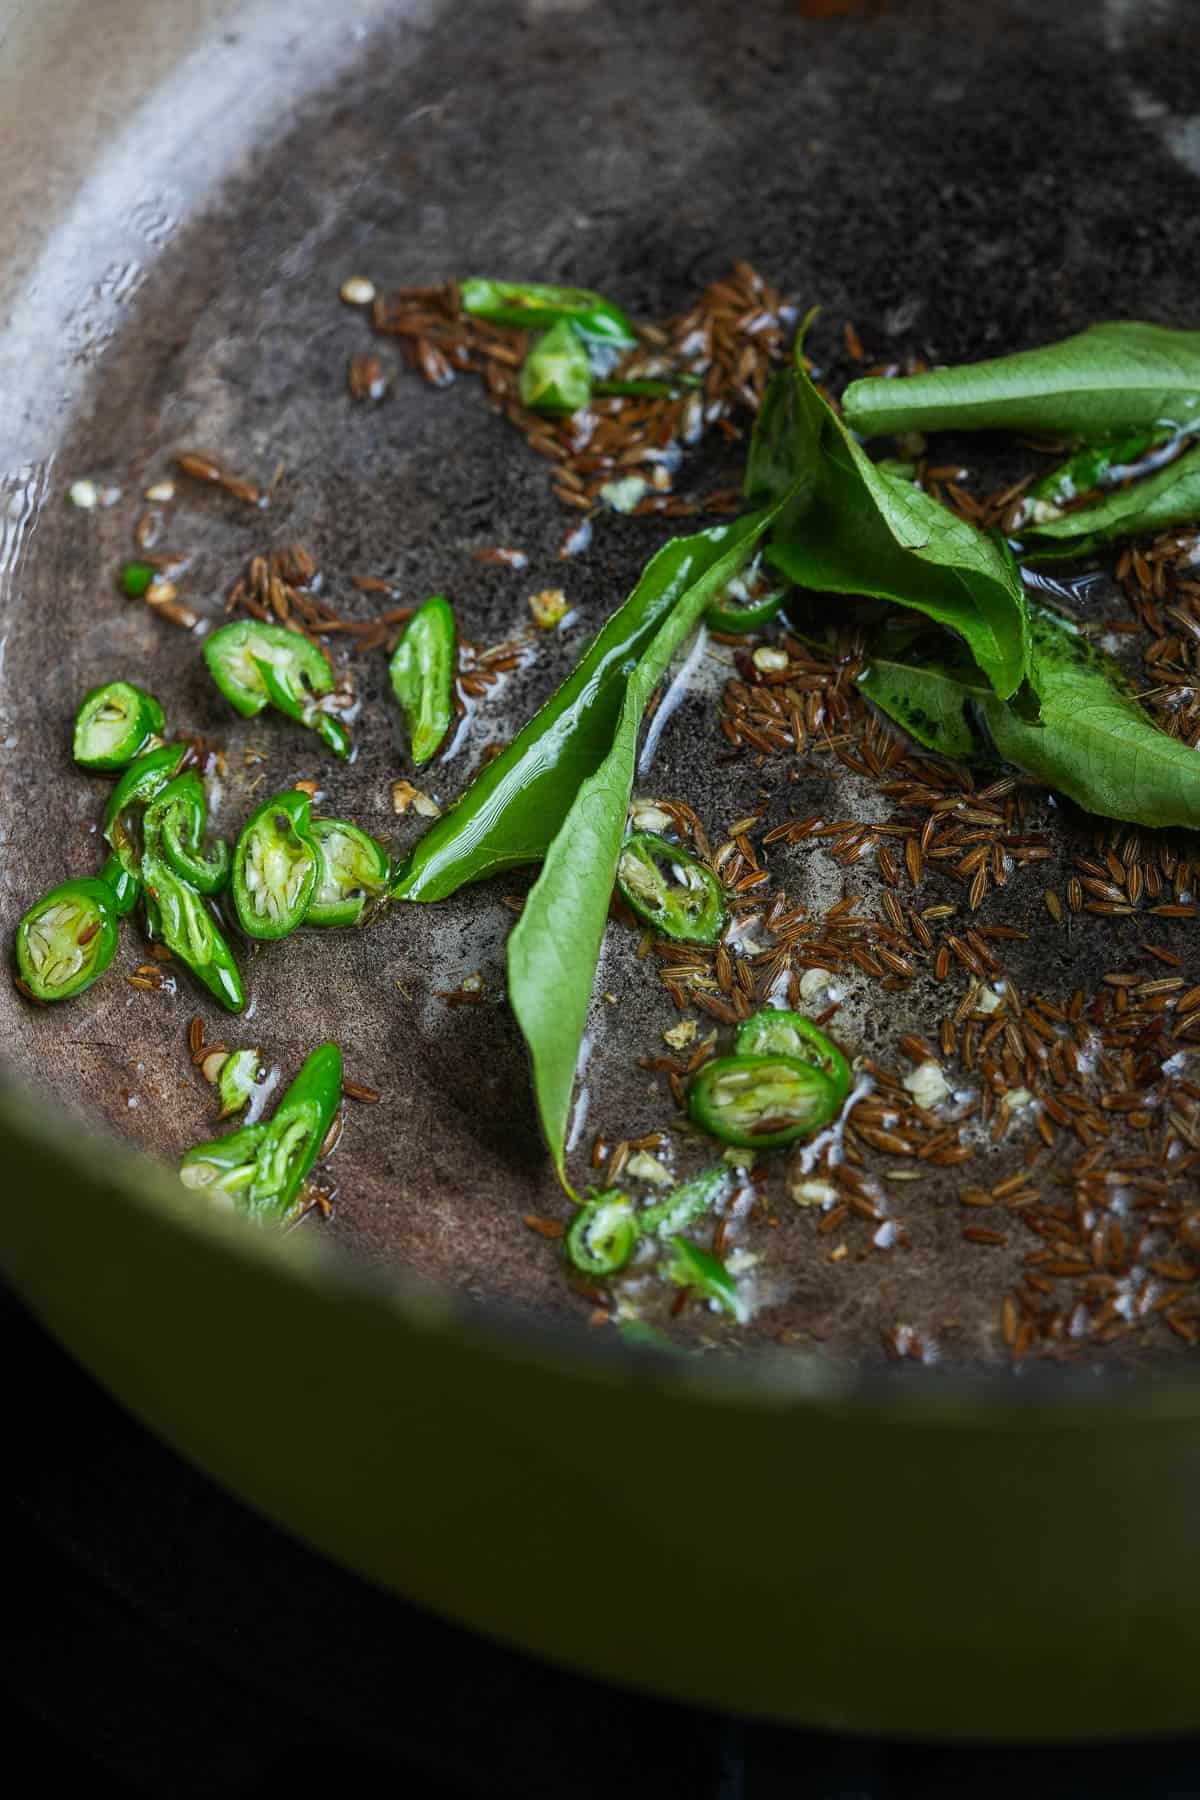 A frying pan with green curry leaves, chilies, and cumin seeds frying in it.